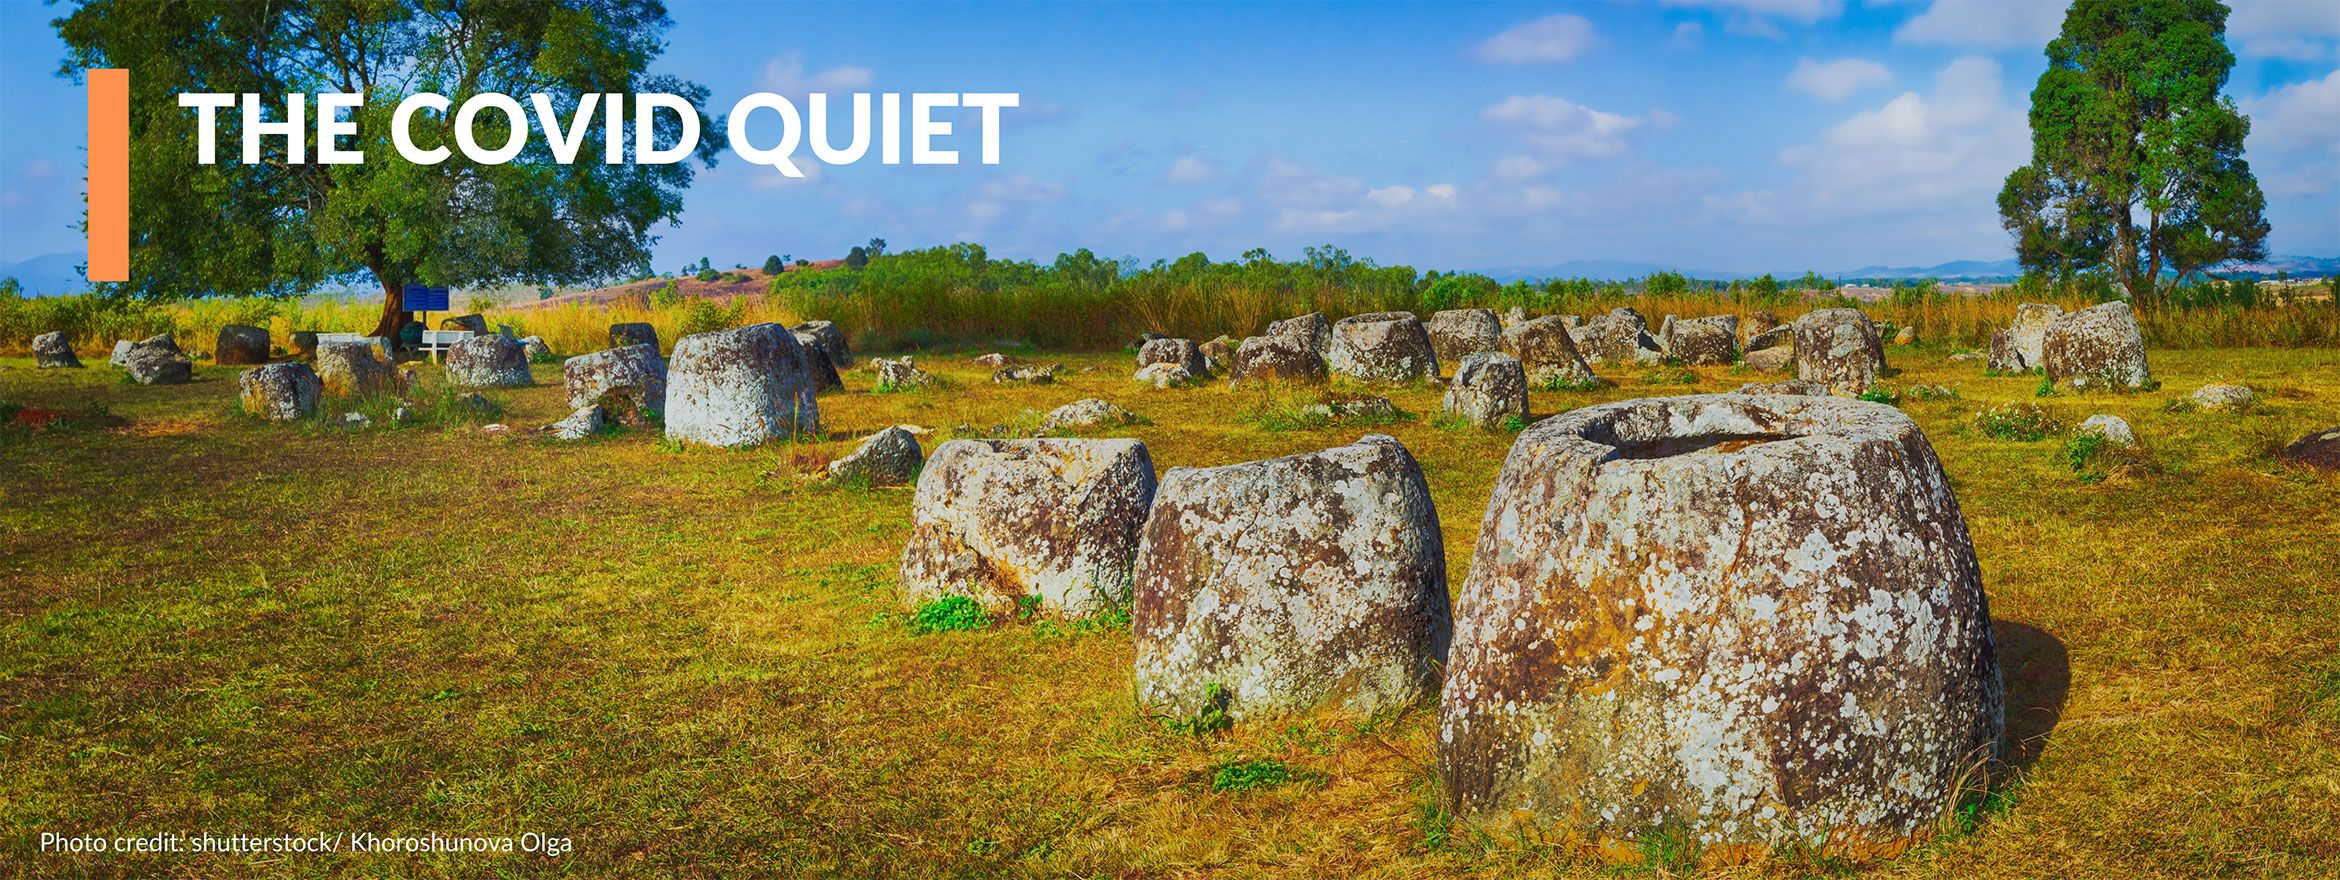 One year after listing, Plain of Jars is a World Heritage indicator amid pandemic